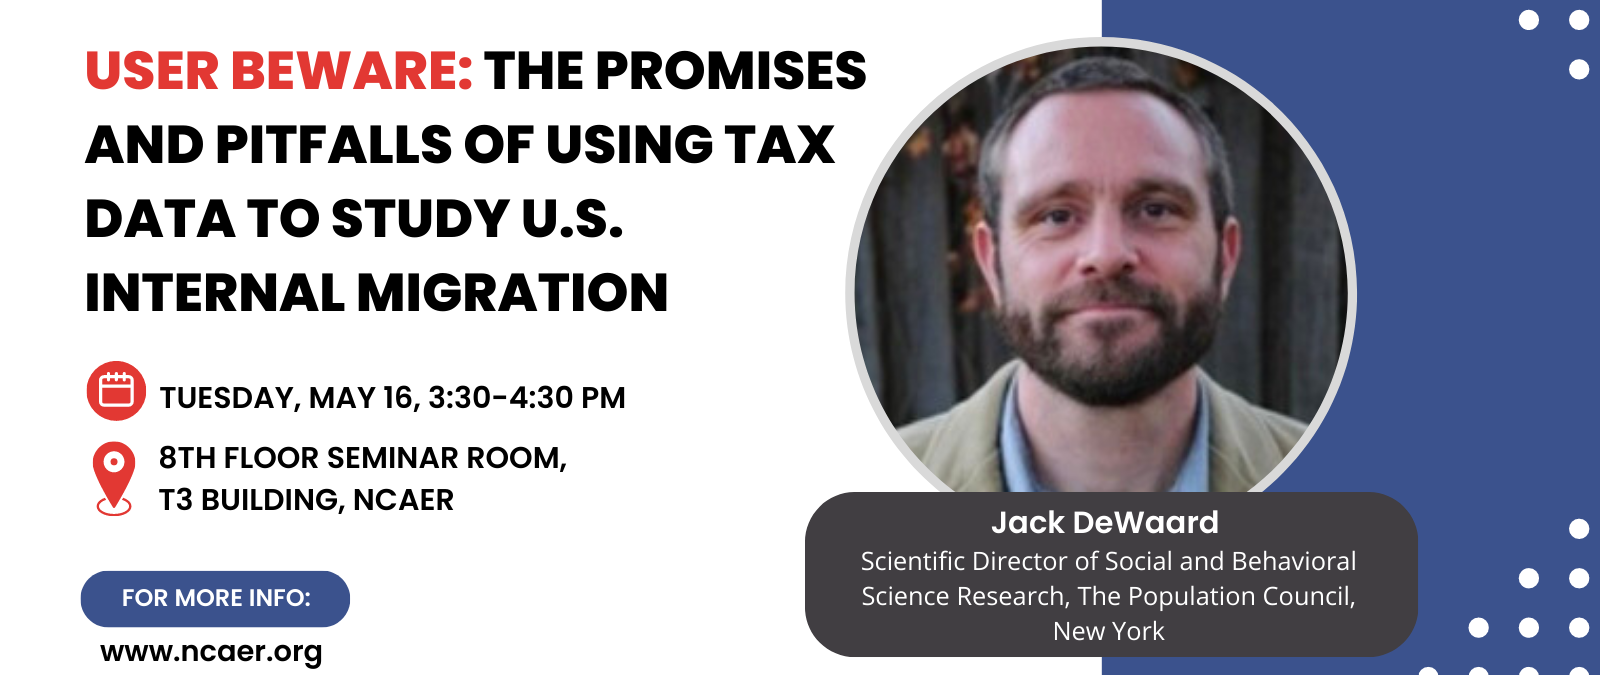 Presentation on “User Beware: The Promises and Pitfalls of Using Tax Data to Study U.S. Internal Migration”